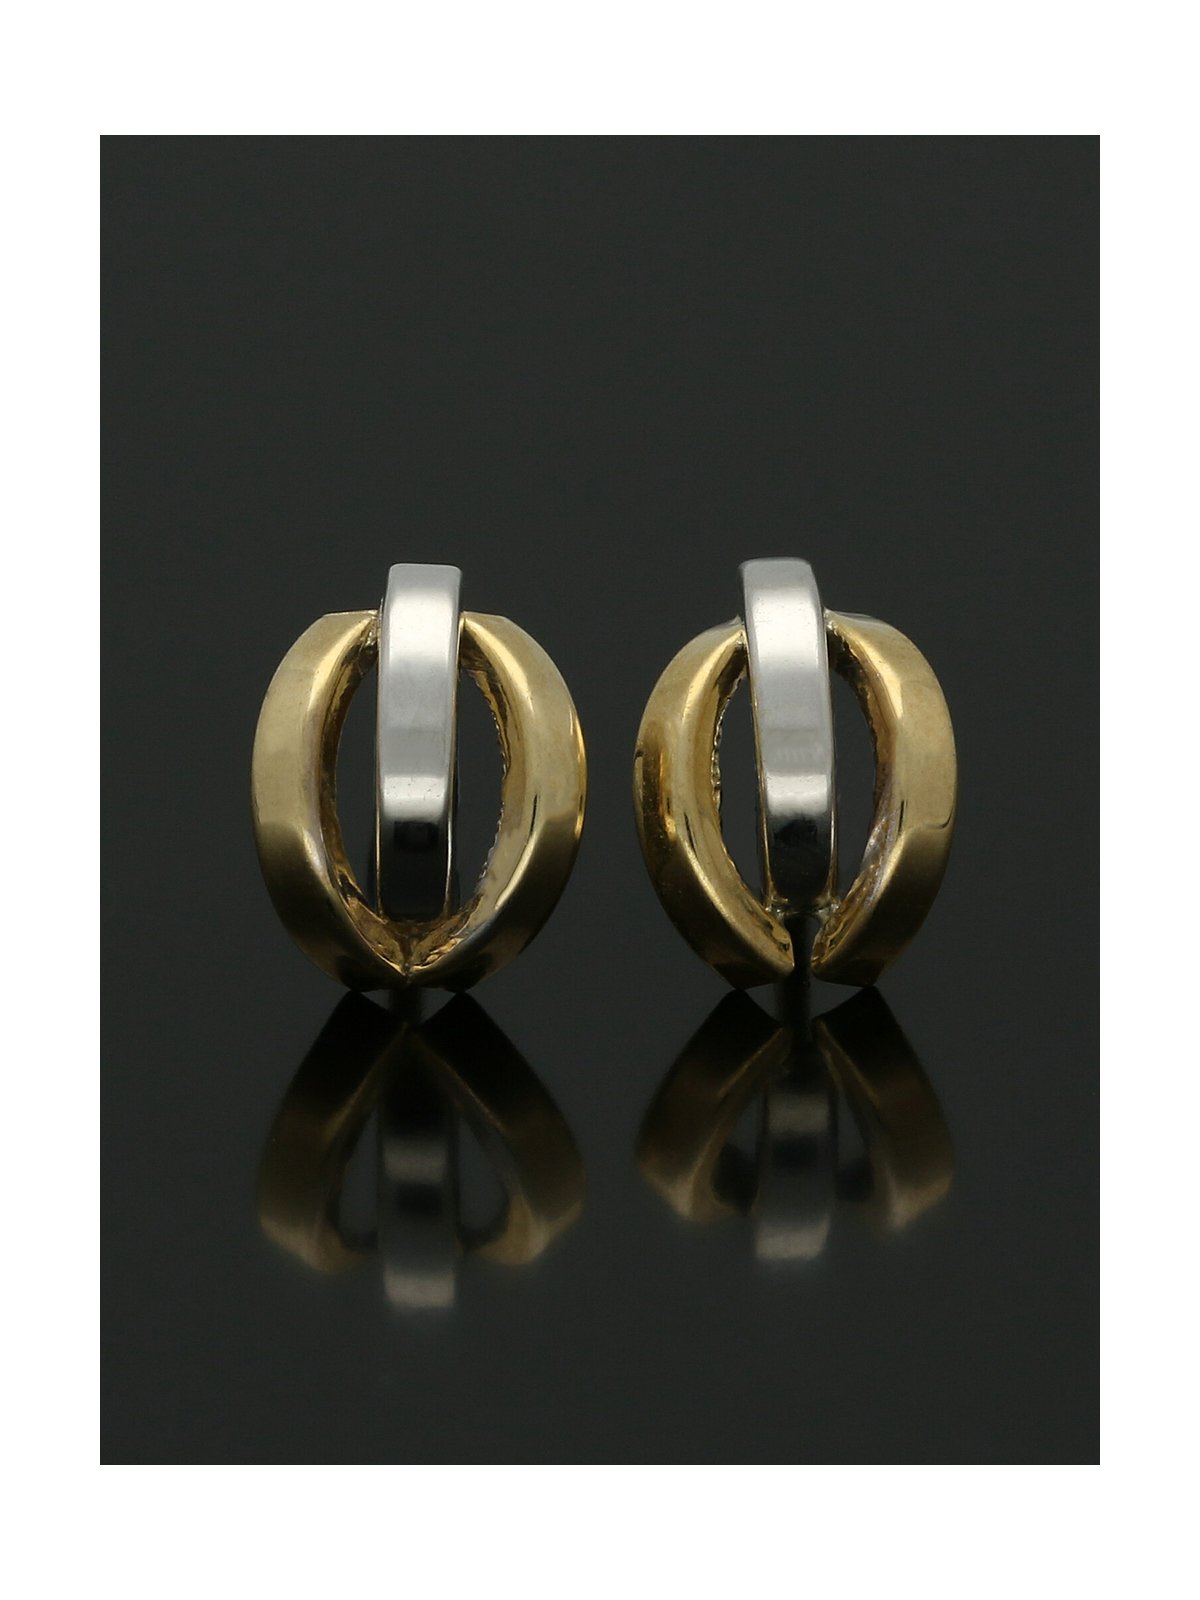 Three Strand Stud Earrings in 9ct Yellow and White Gold